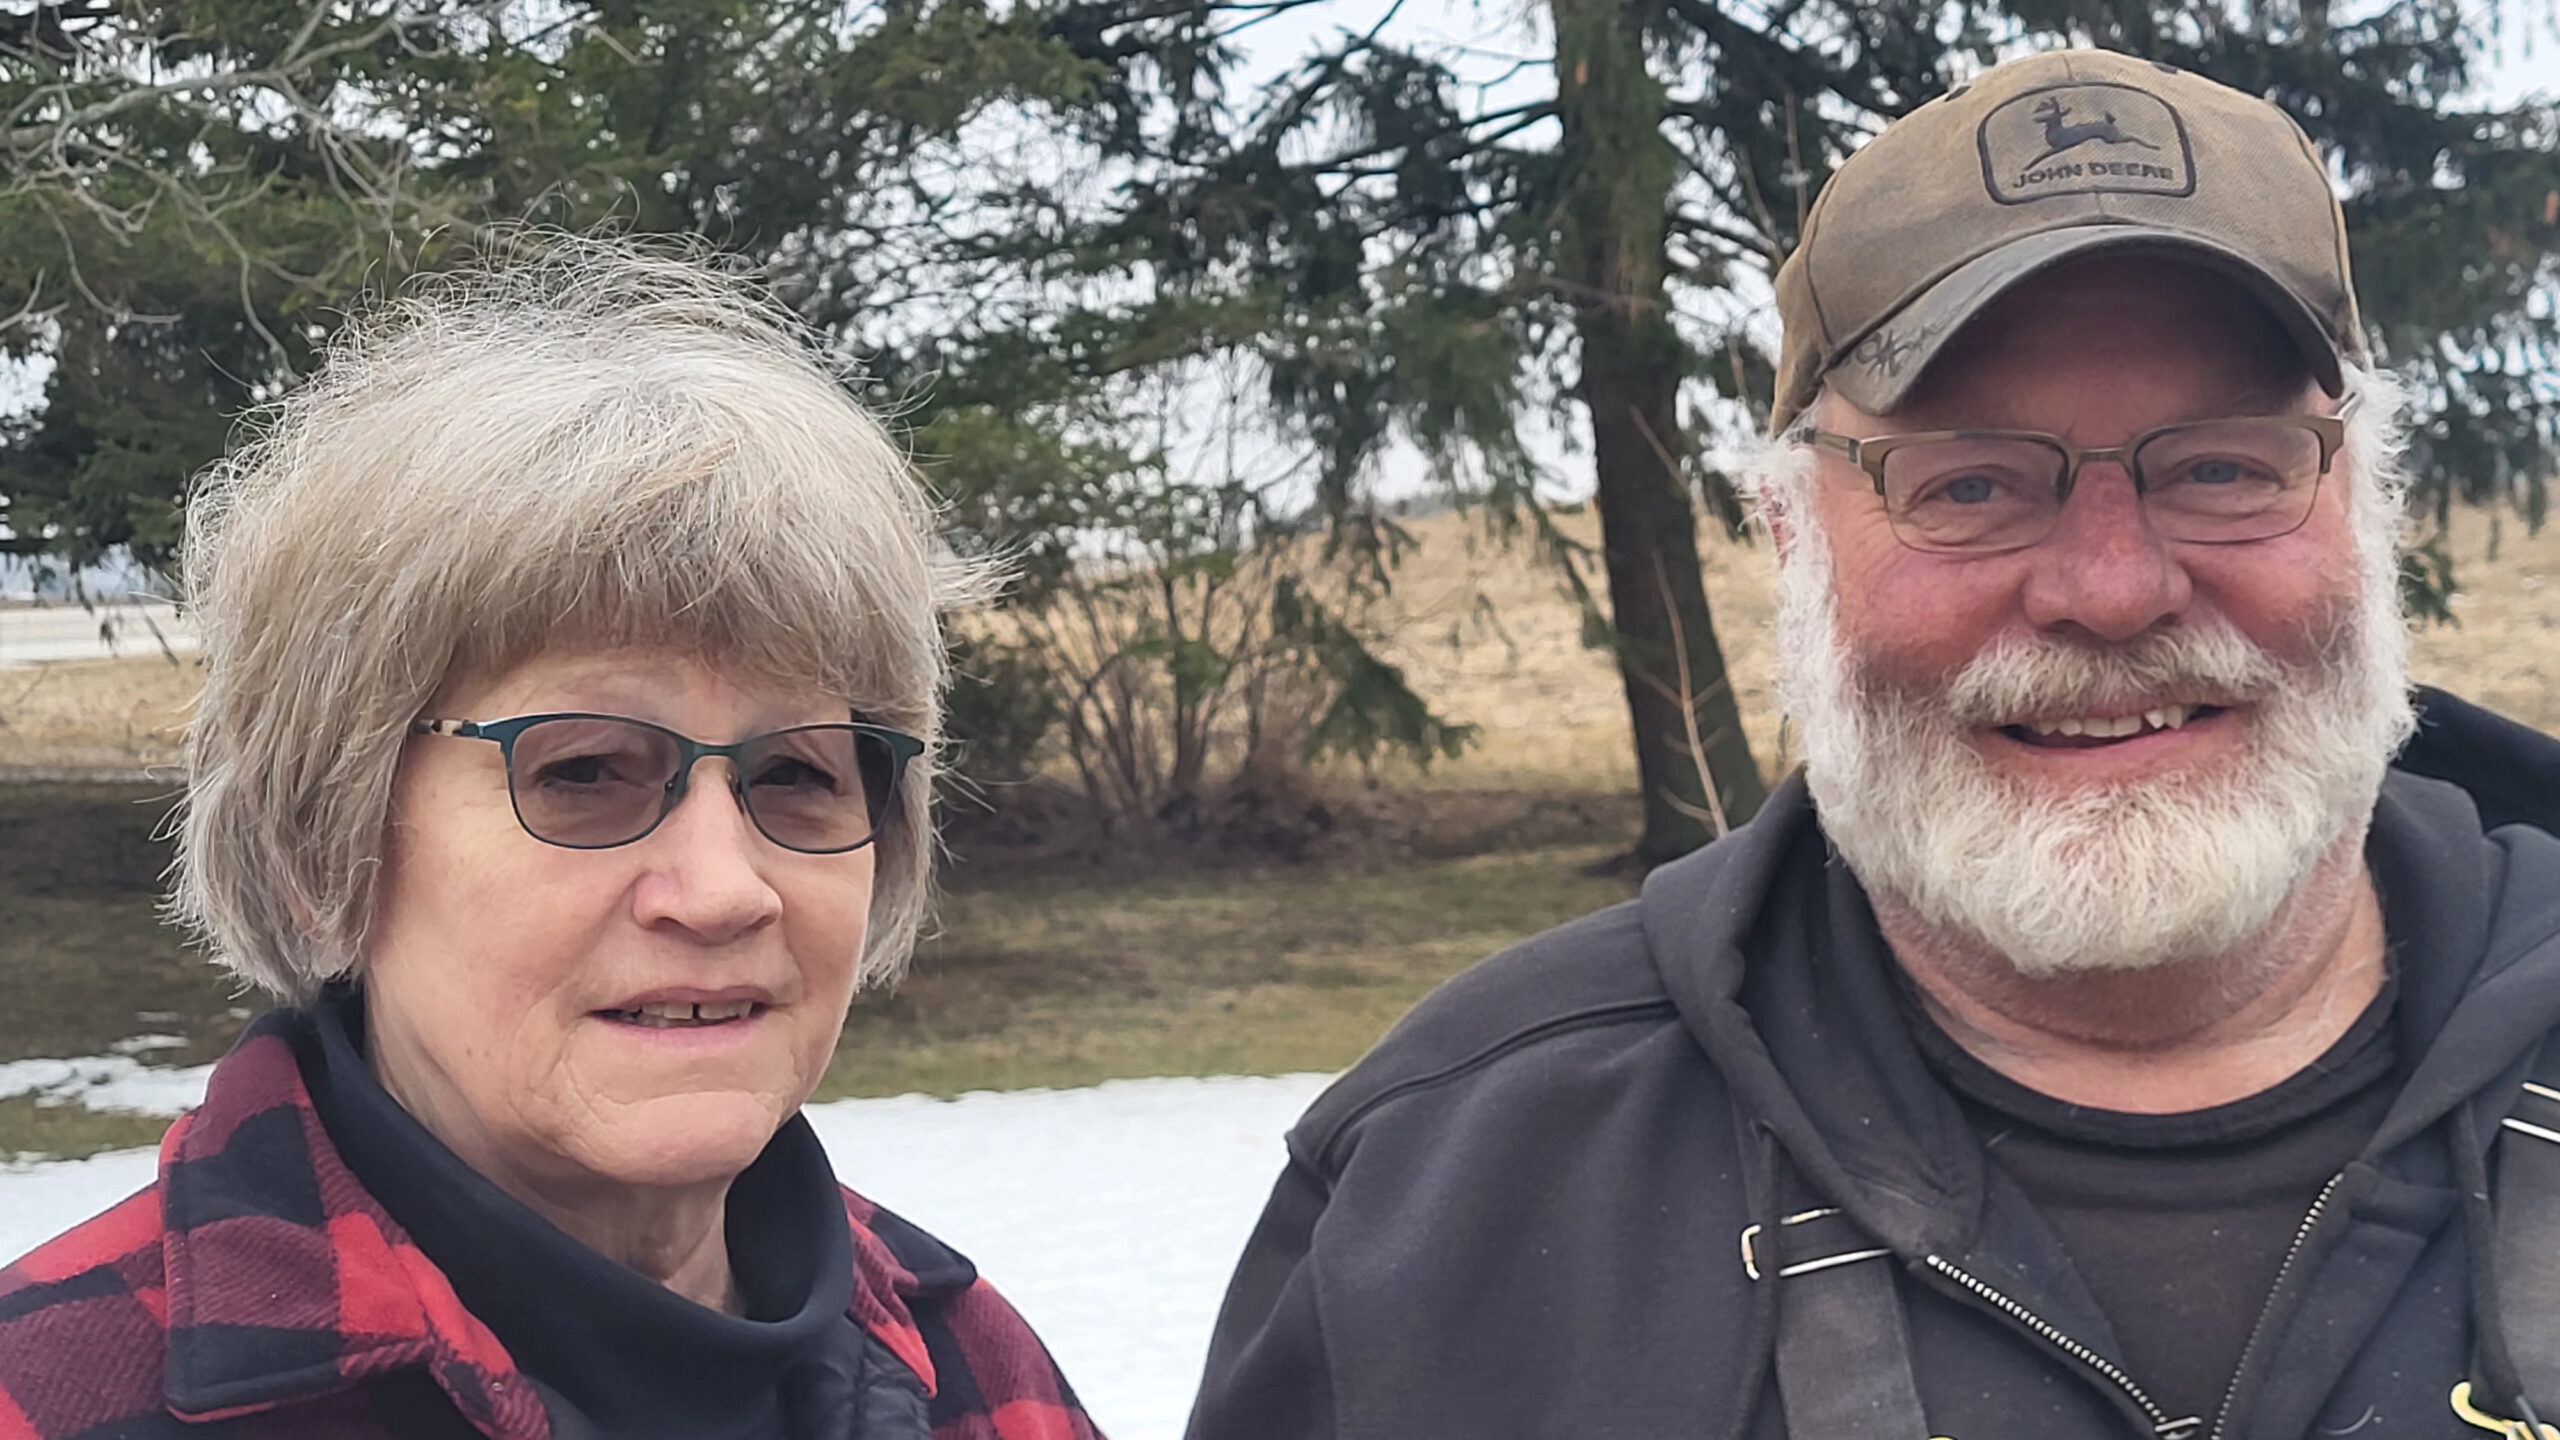 Farmer proves it’s never too late to learn new practices